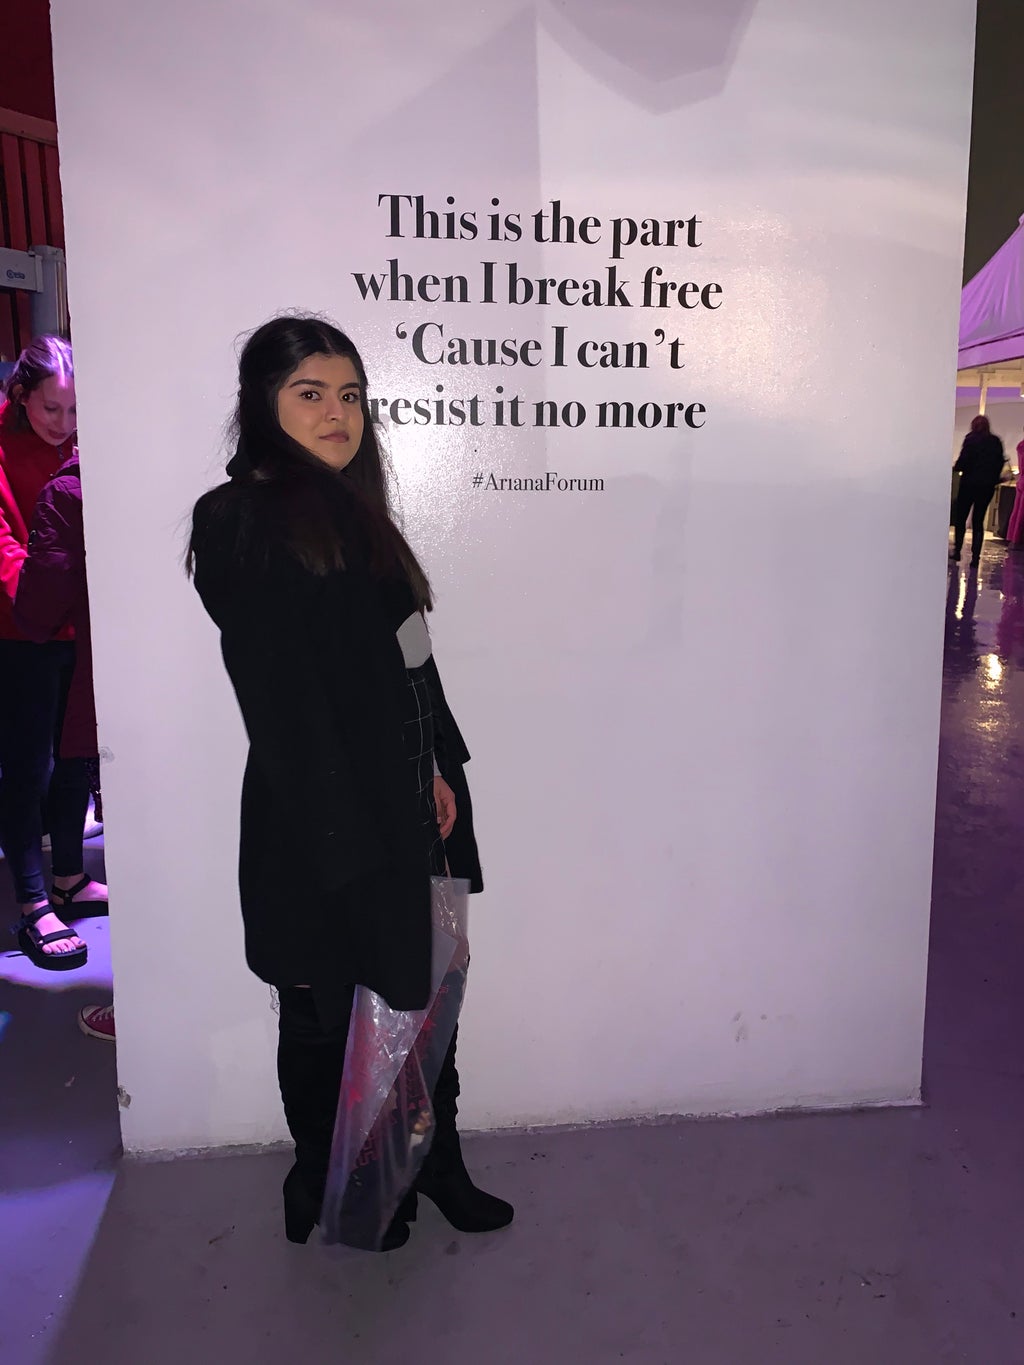 It is a picture of me in front of Ariana Grandes song lyrics (Break Free).